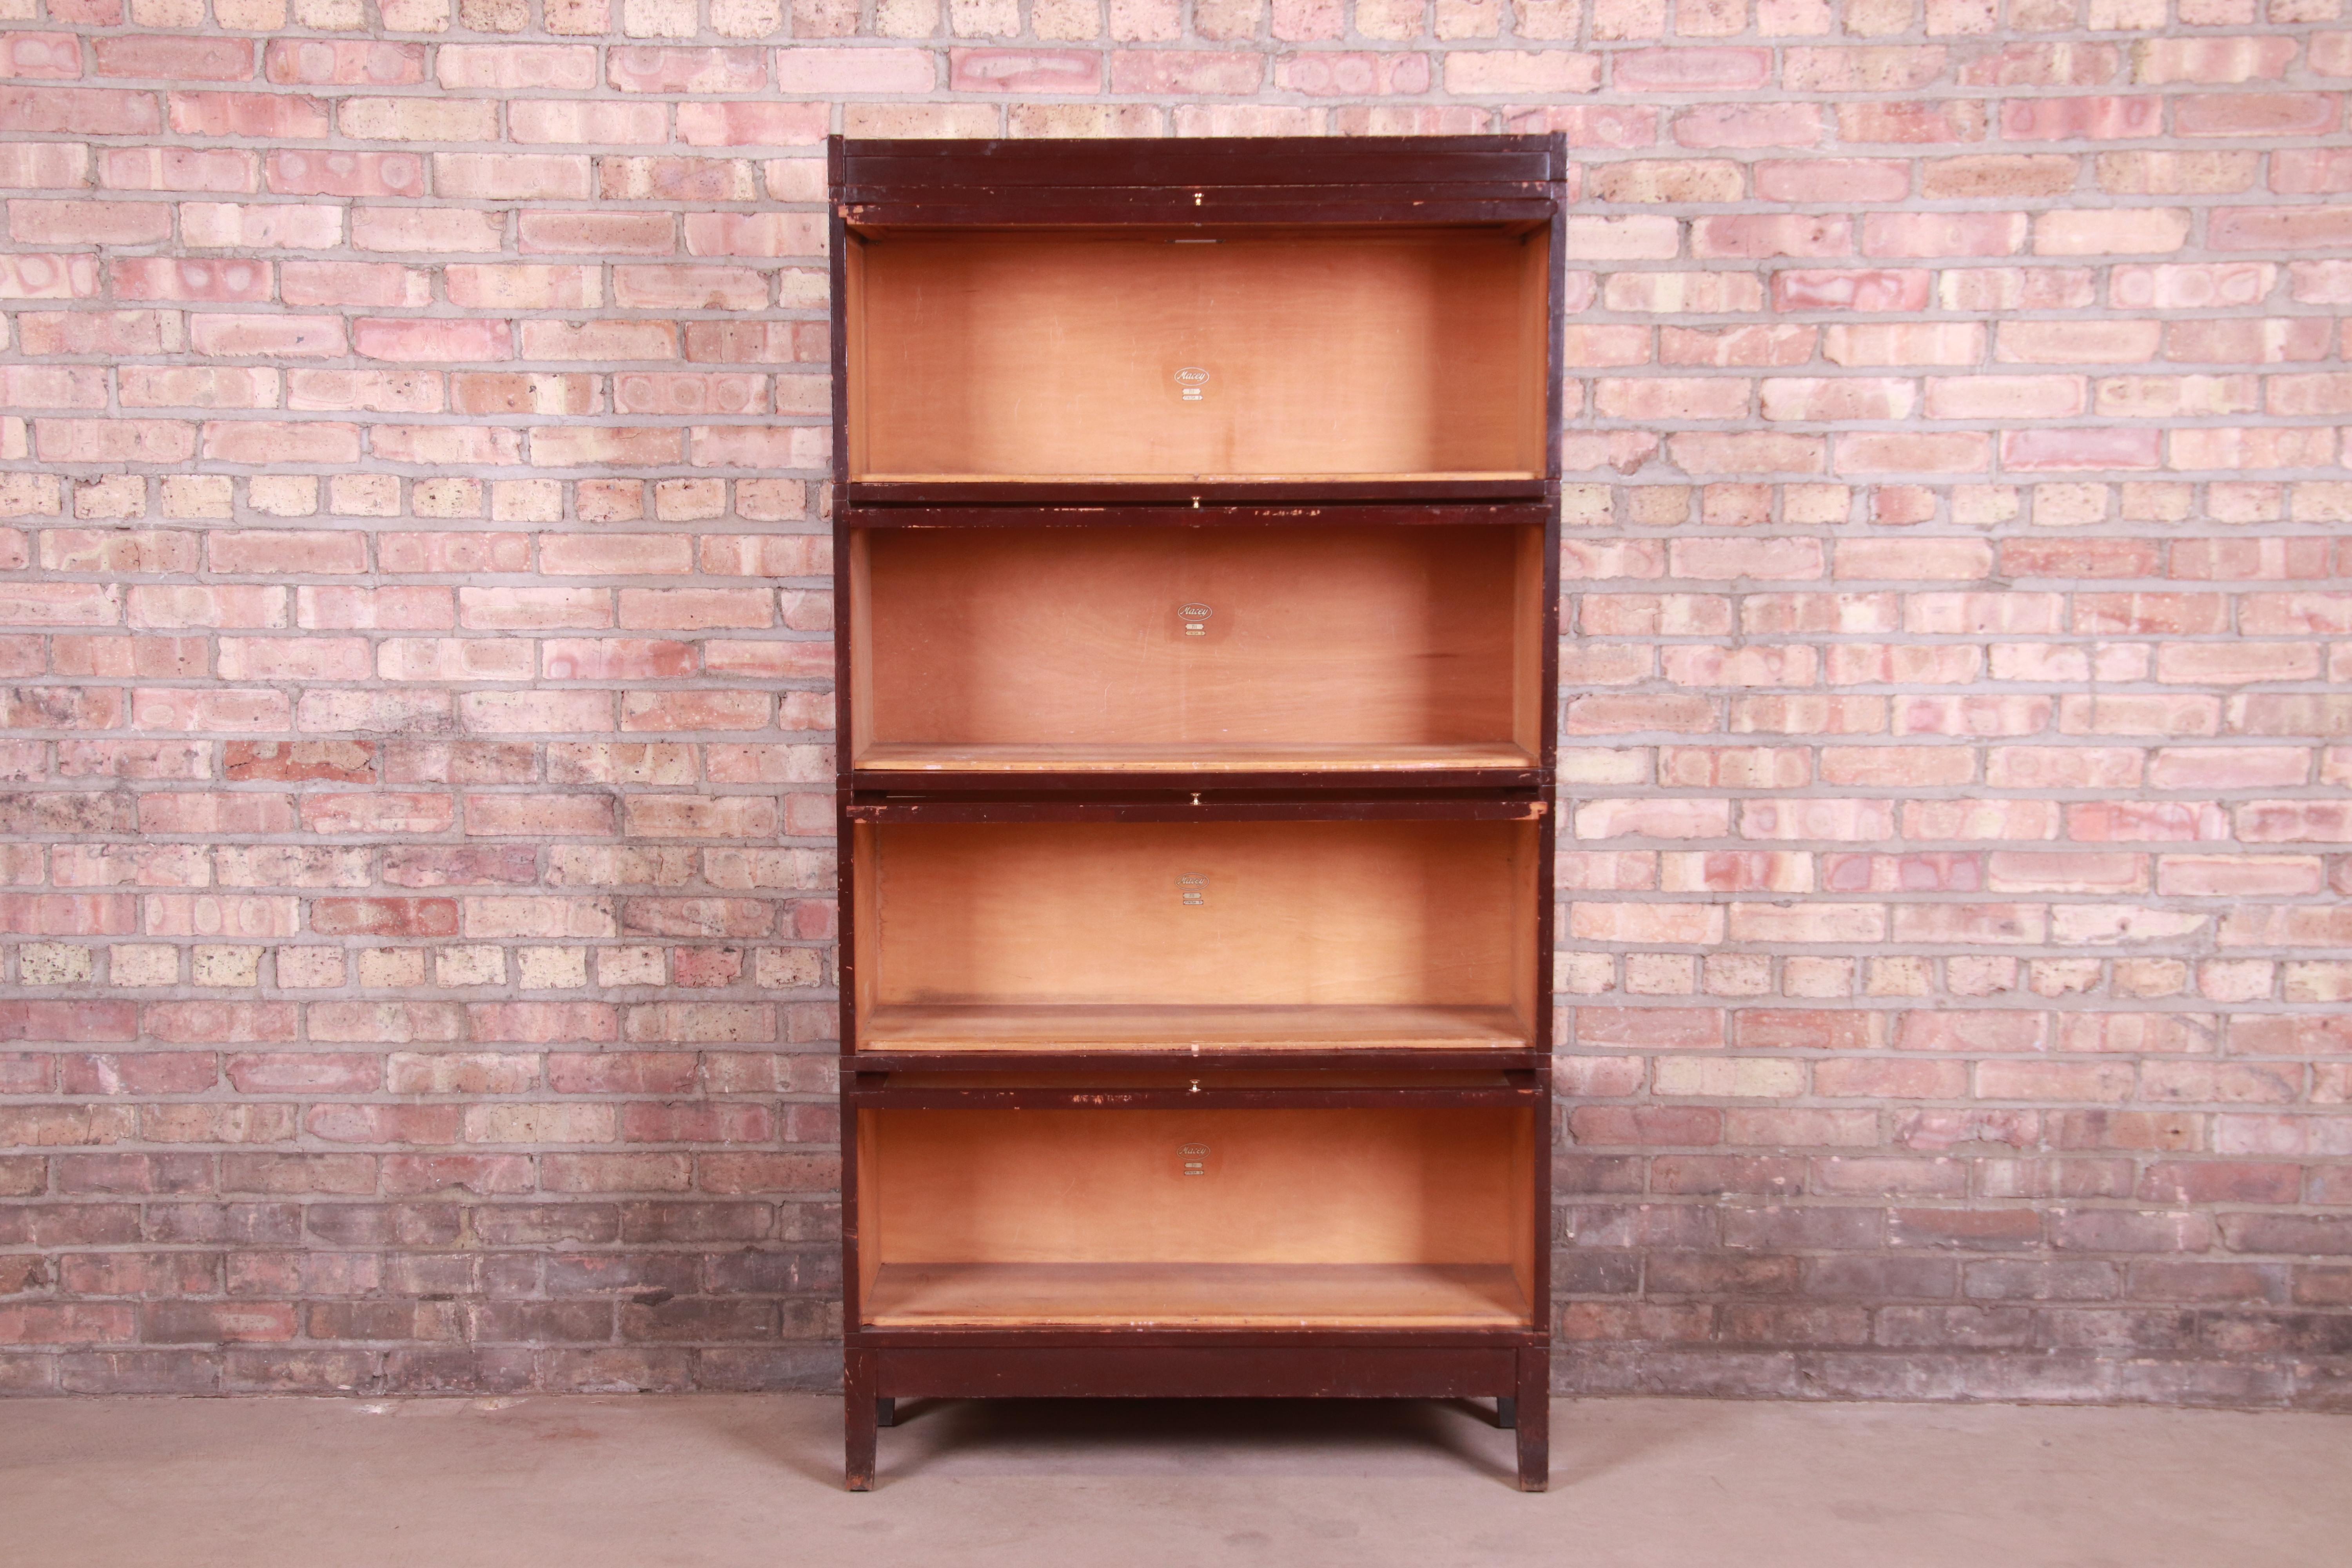 20th Century Antique Four-Stack Barrister Bookcase by Macey, Circa 1920s For Sale